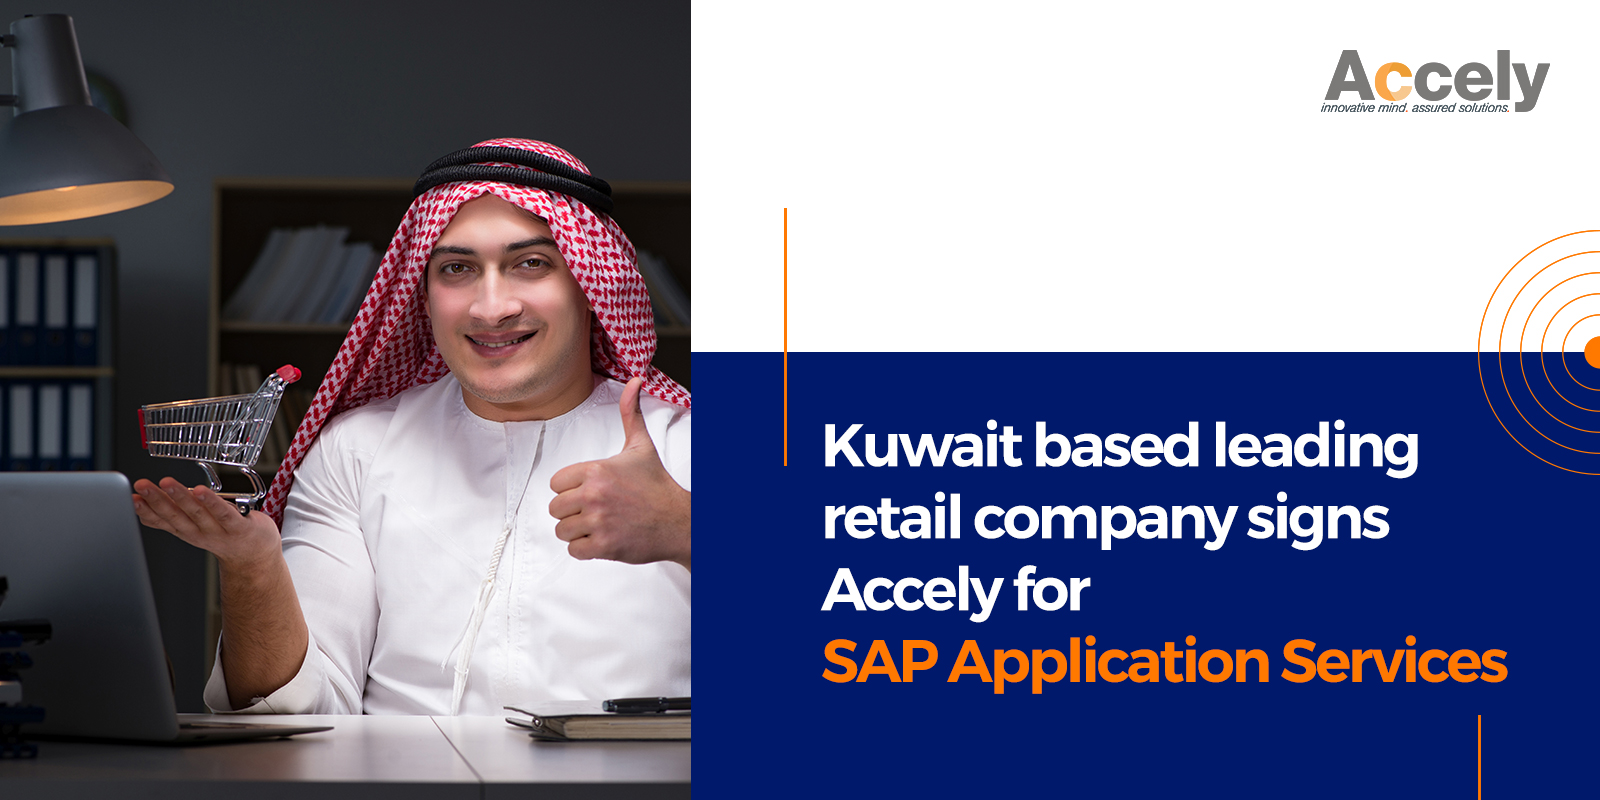 Kuwait based leading retail company signs Accely for SAP Application Services